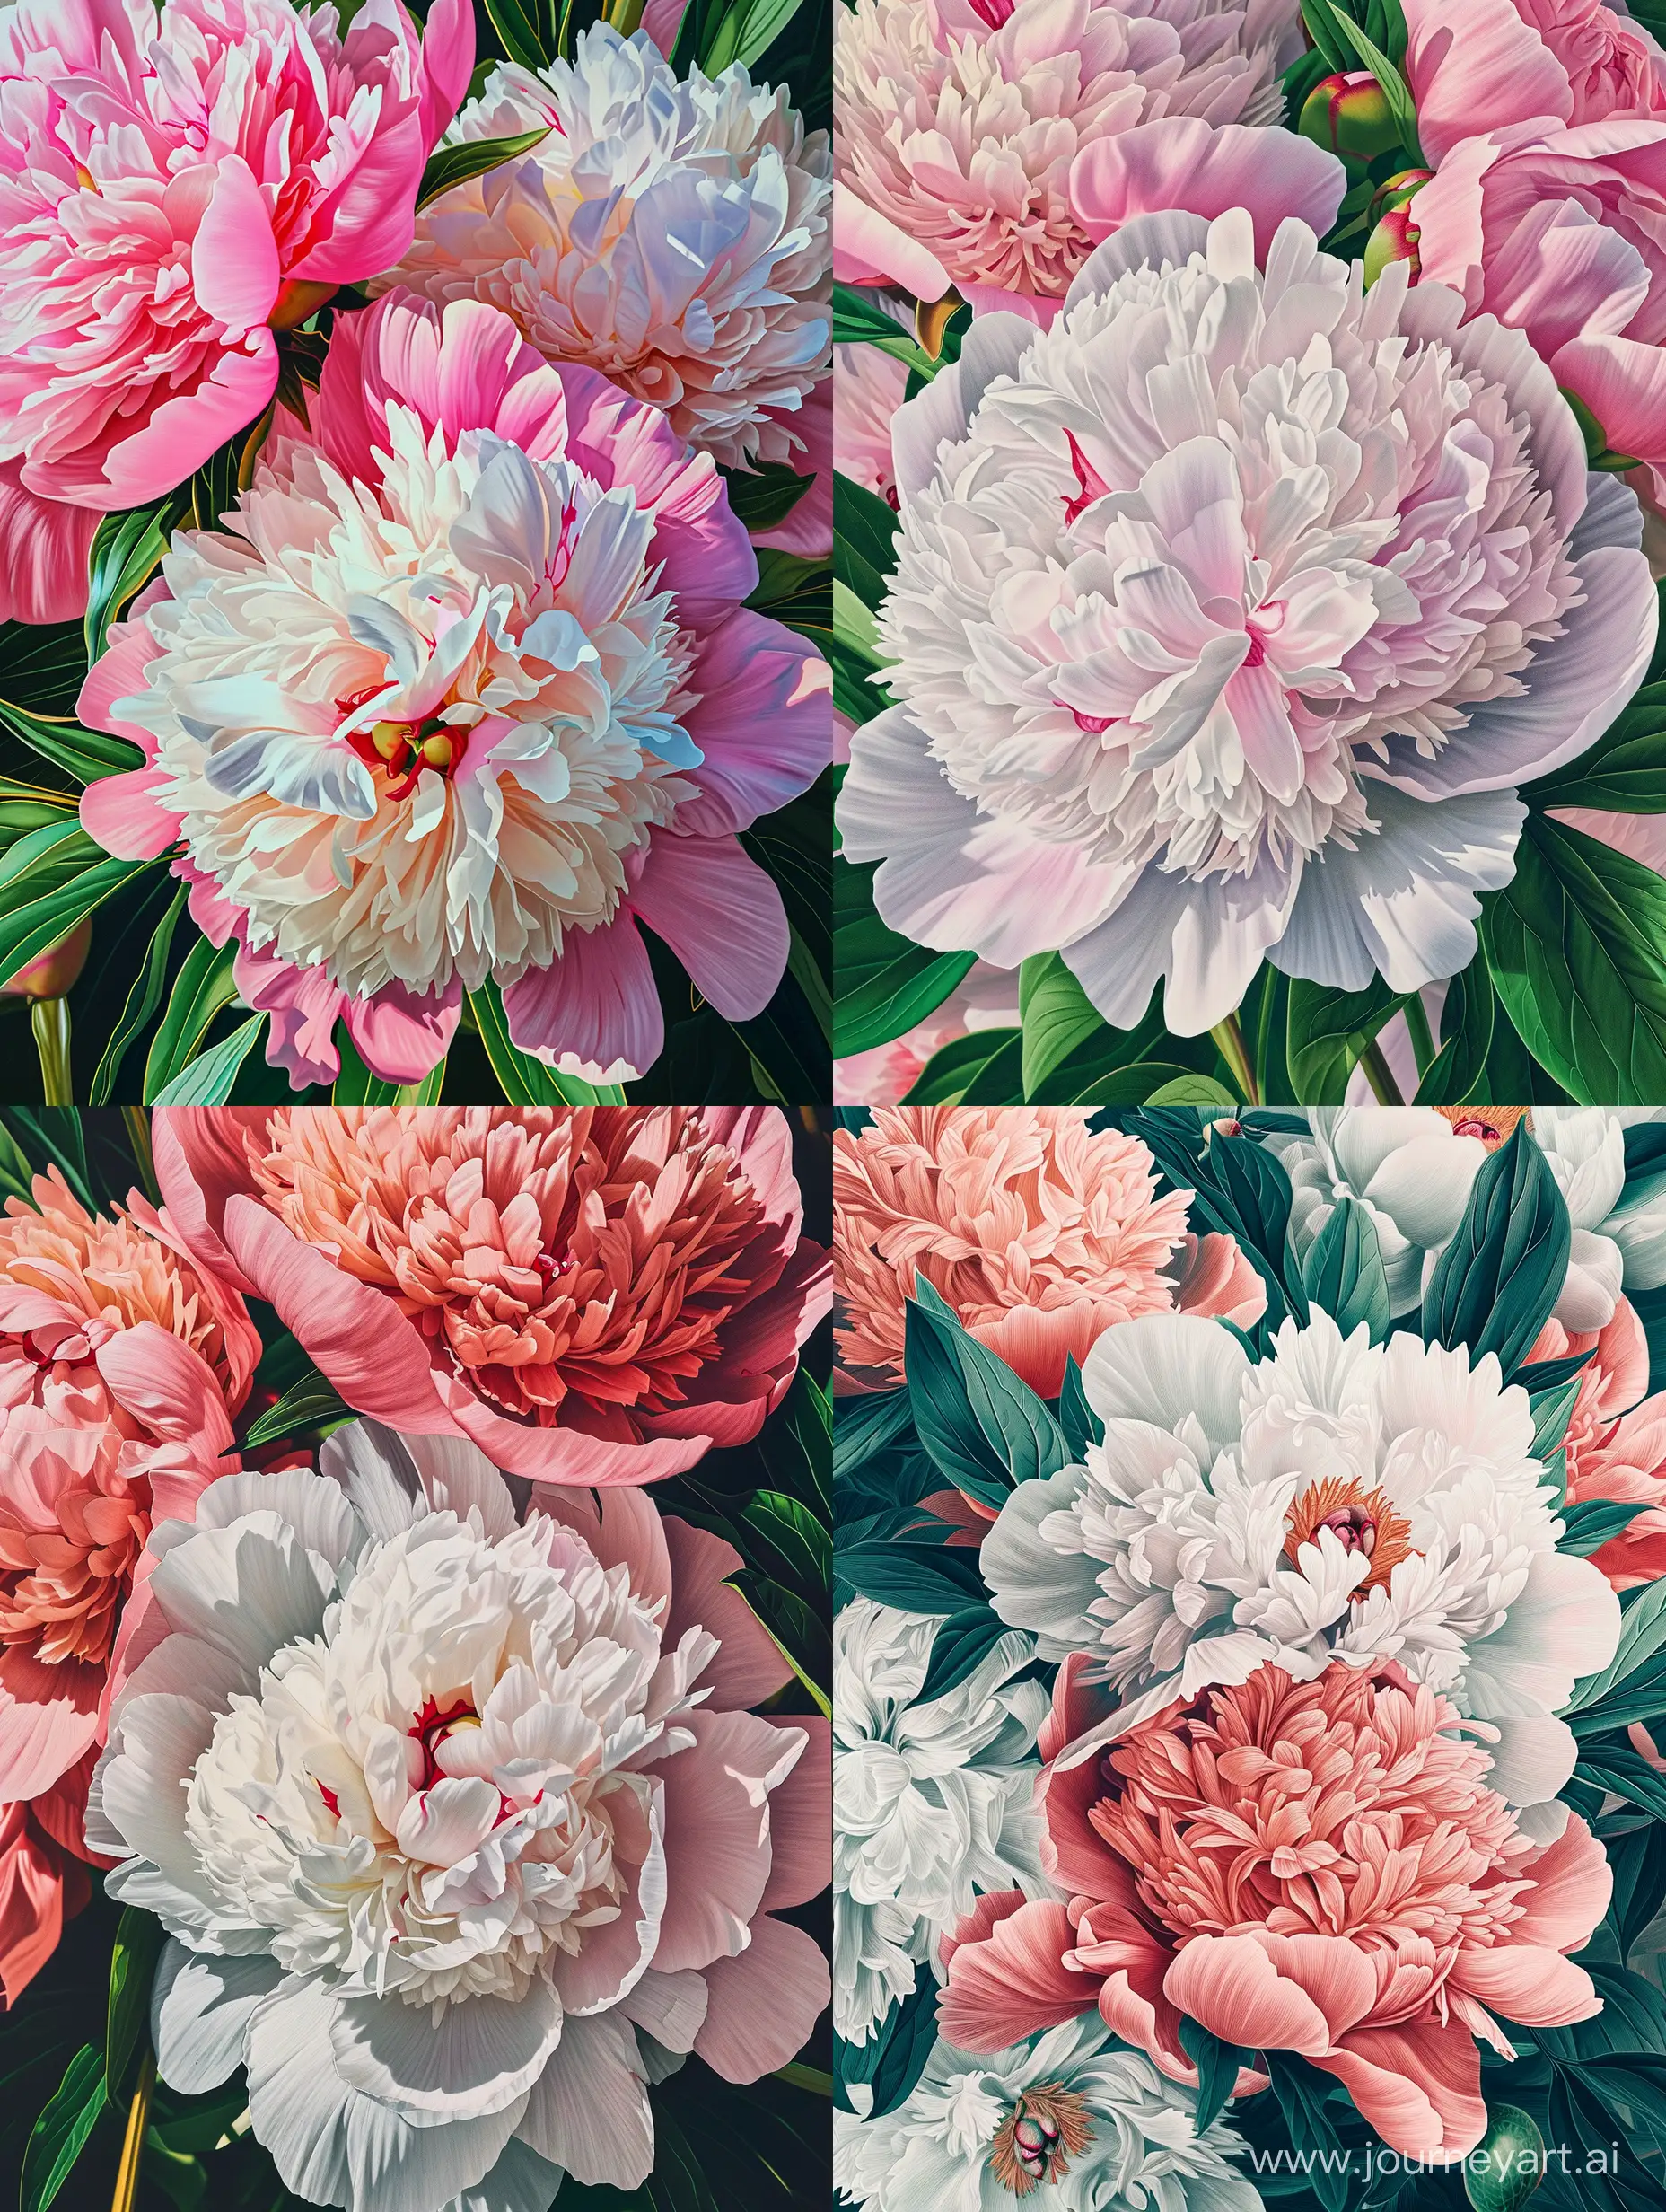 Lively-HyperRealistic-Risograph-Intricate-Peonies-in-Full-Bloom